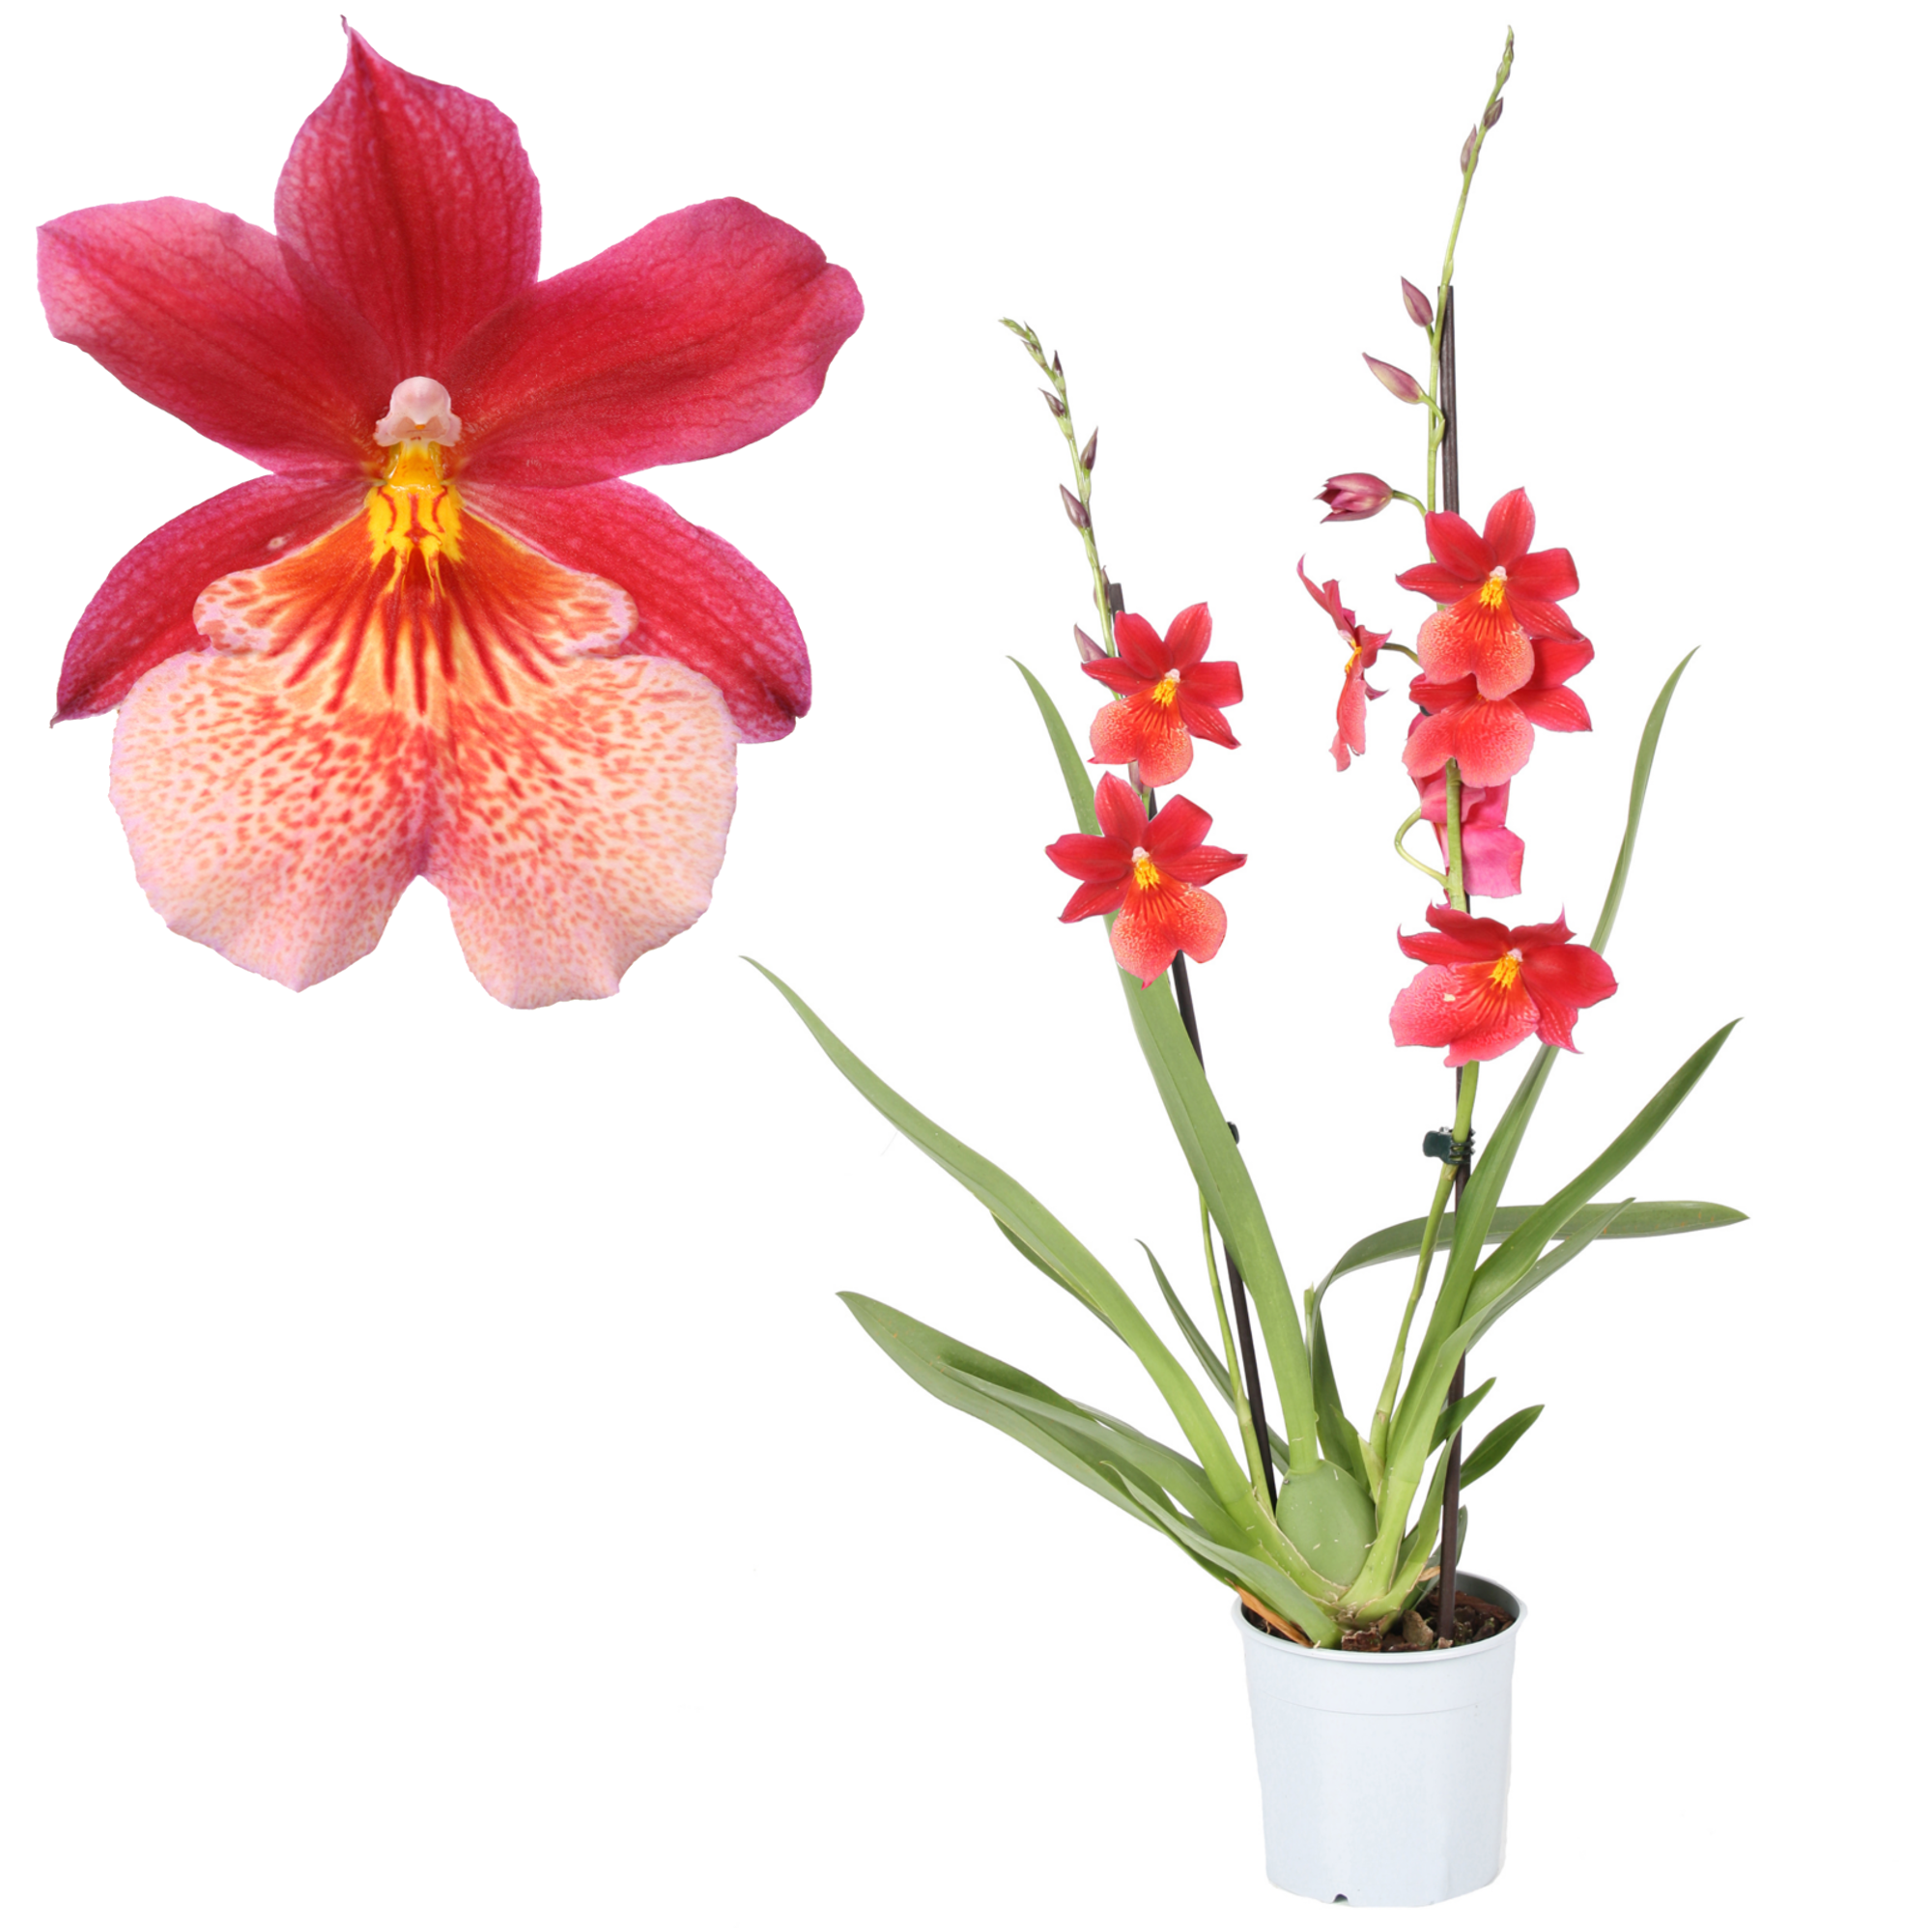 Cambria-Orchidee 'Nelly Isler' 2 Rispen rot 12 cm Topf + product picture